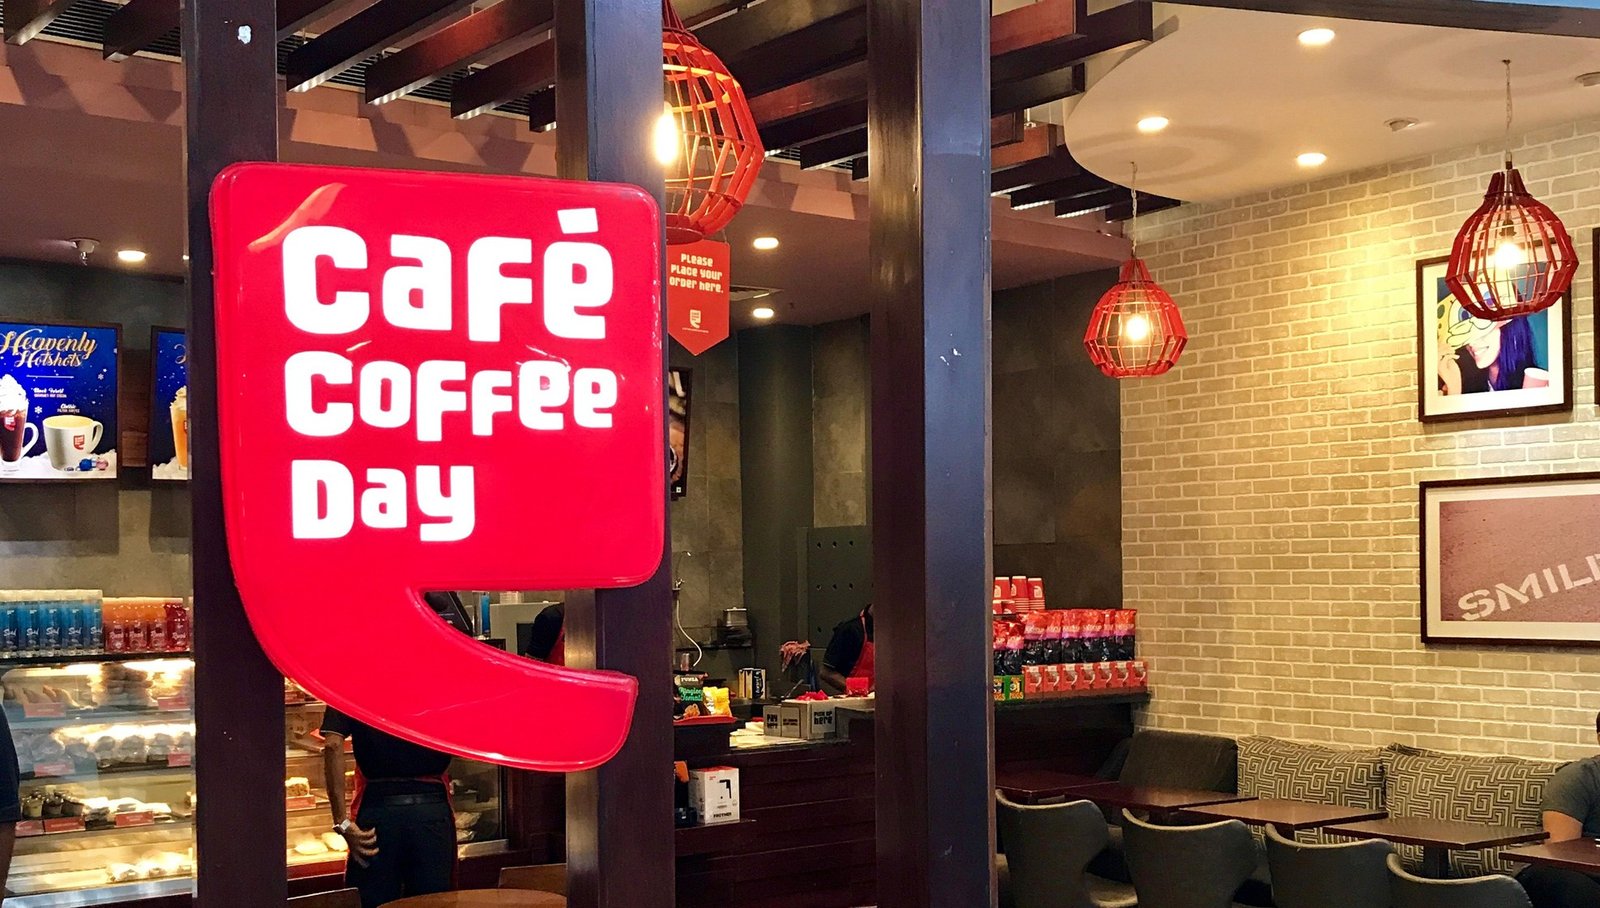 Marketing Strategy of Cafe Coffee Day